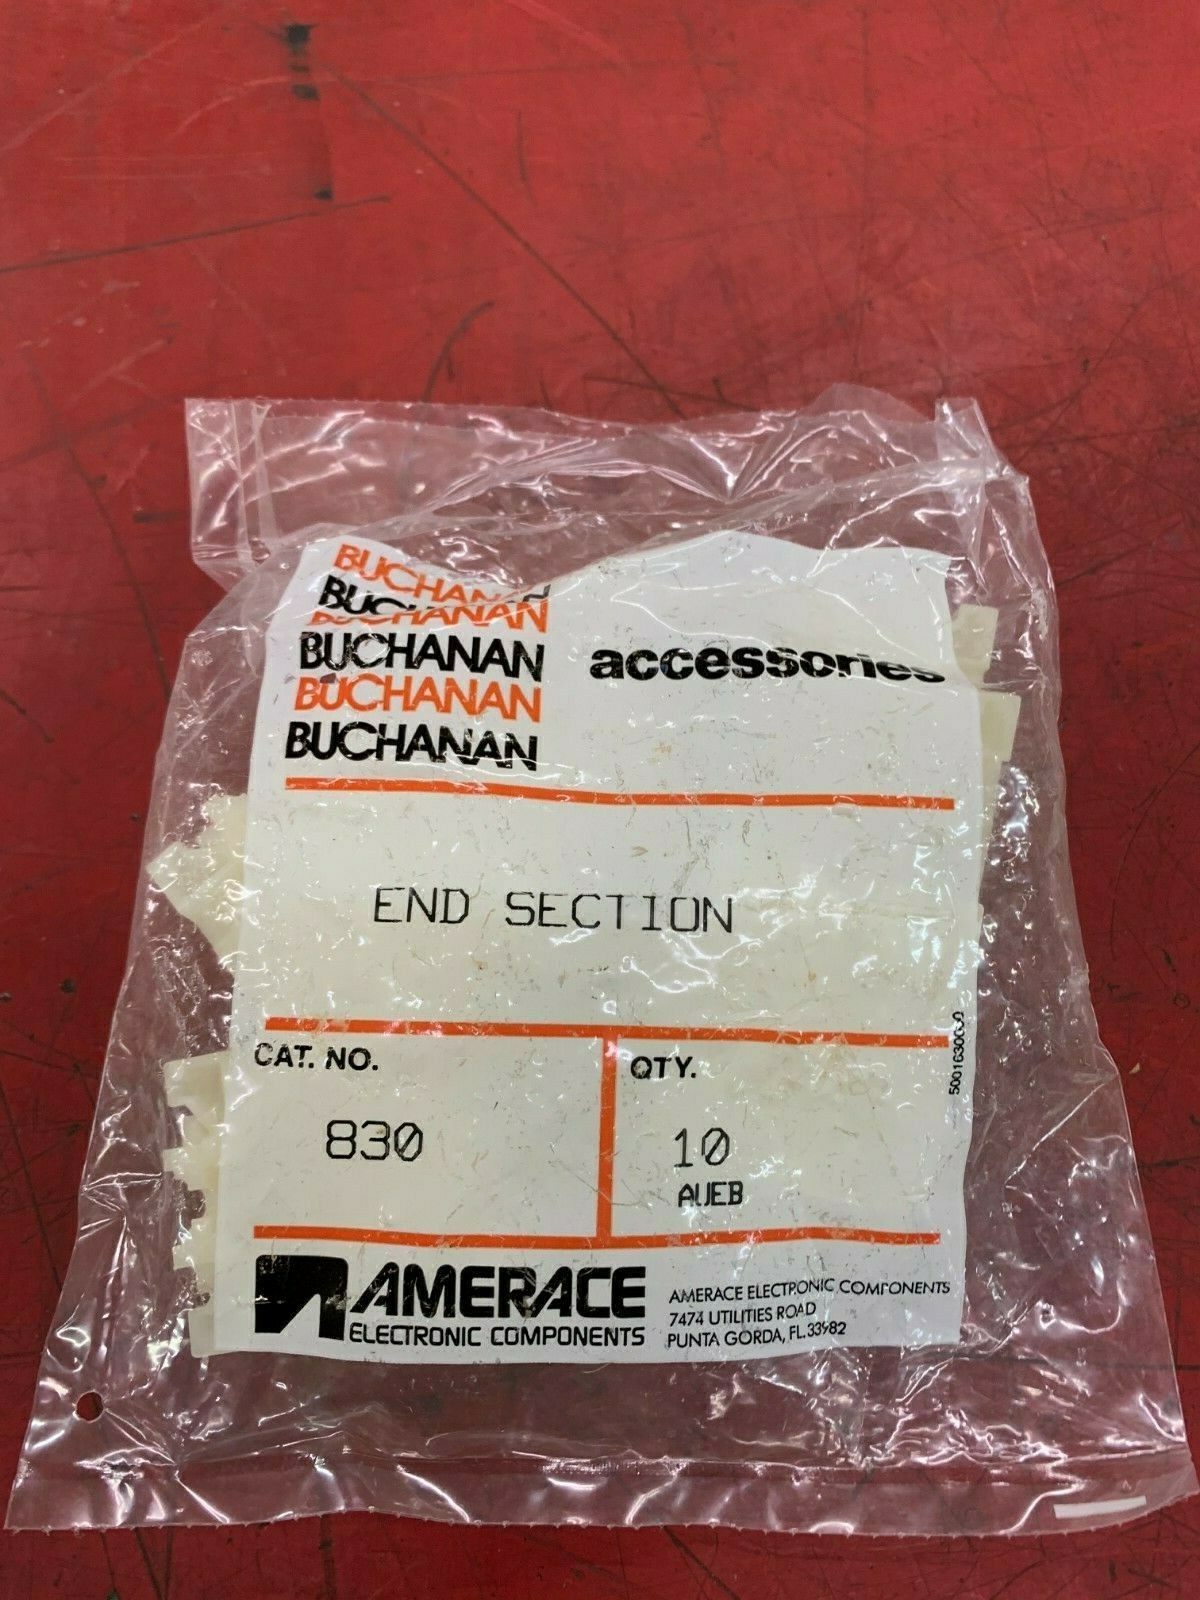 BAG OF 10 NEW IN BAG BUCHANAN END SECTION 830